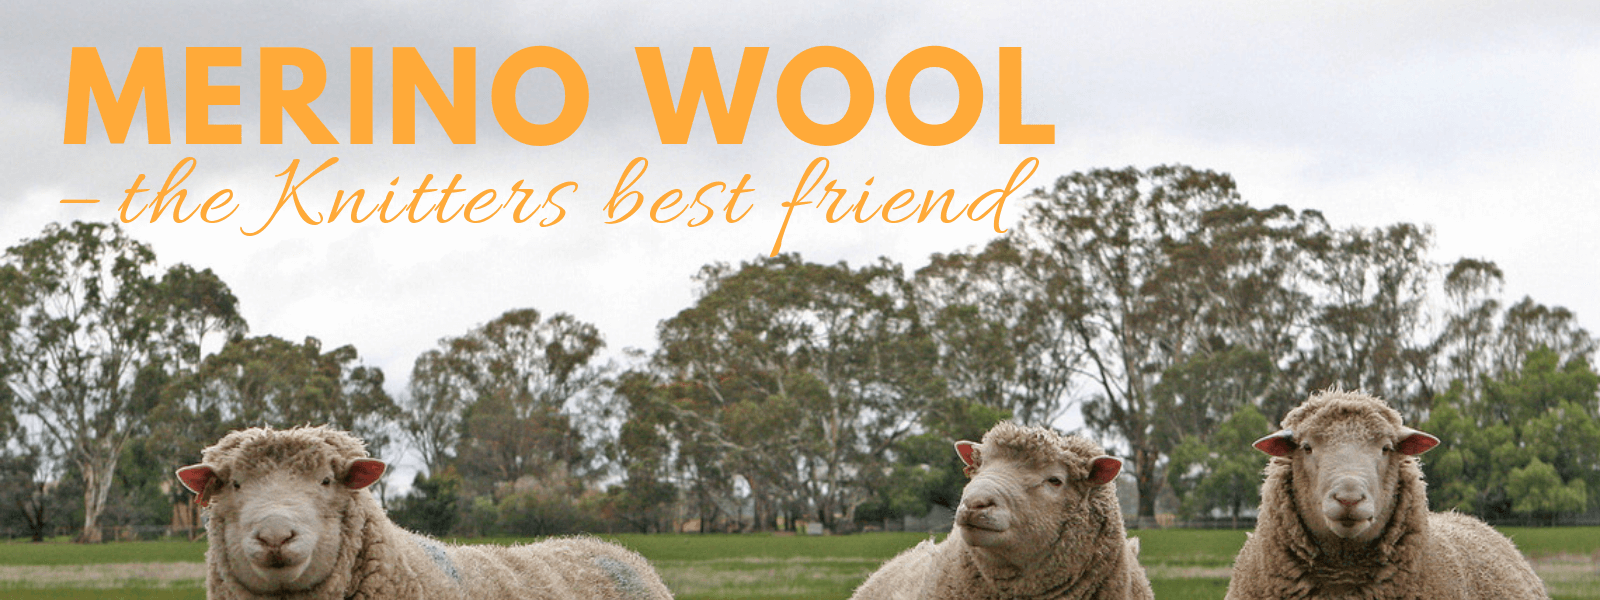 Merino wool - this article answers all your questions like, why merino softer than other wool? Why is it so warm? Can it really breathe? And how do the merino sheep look like?